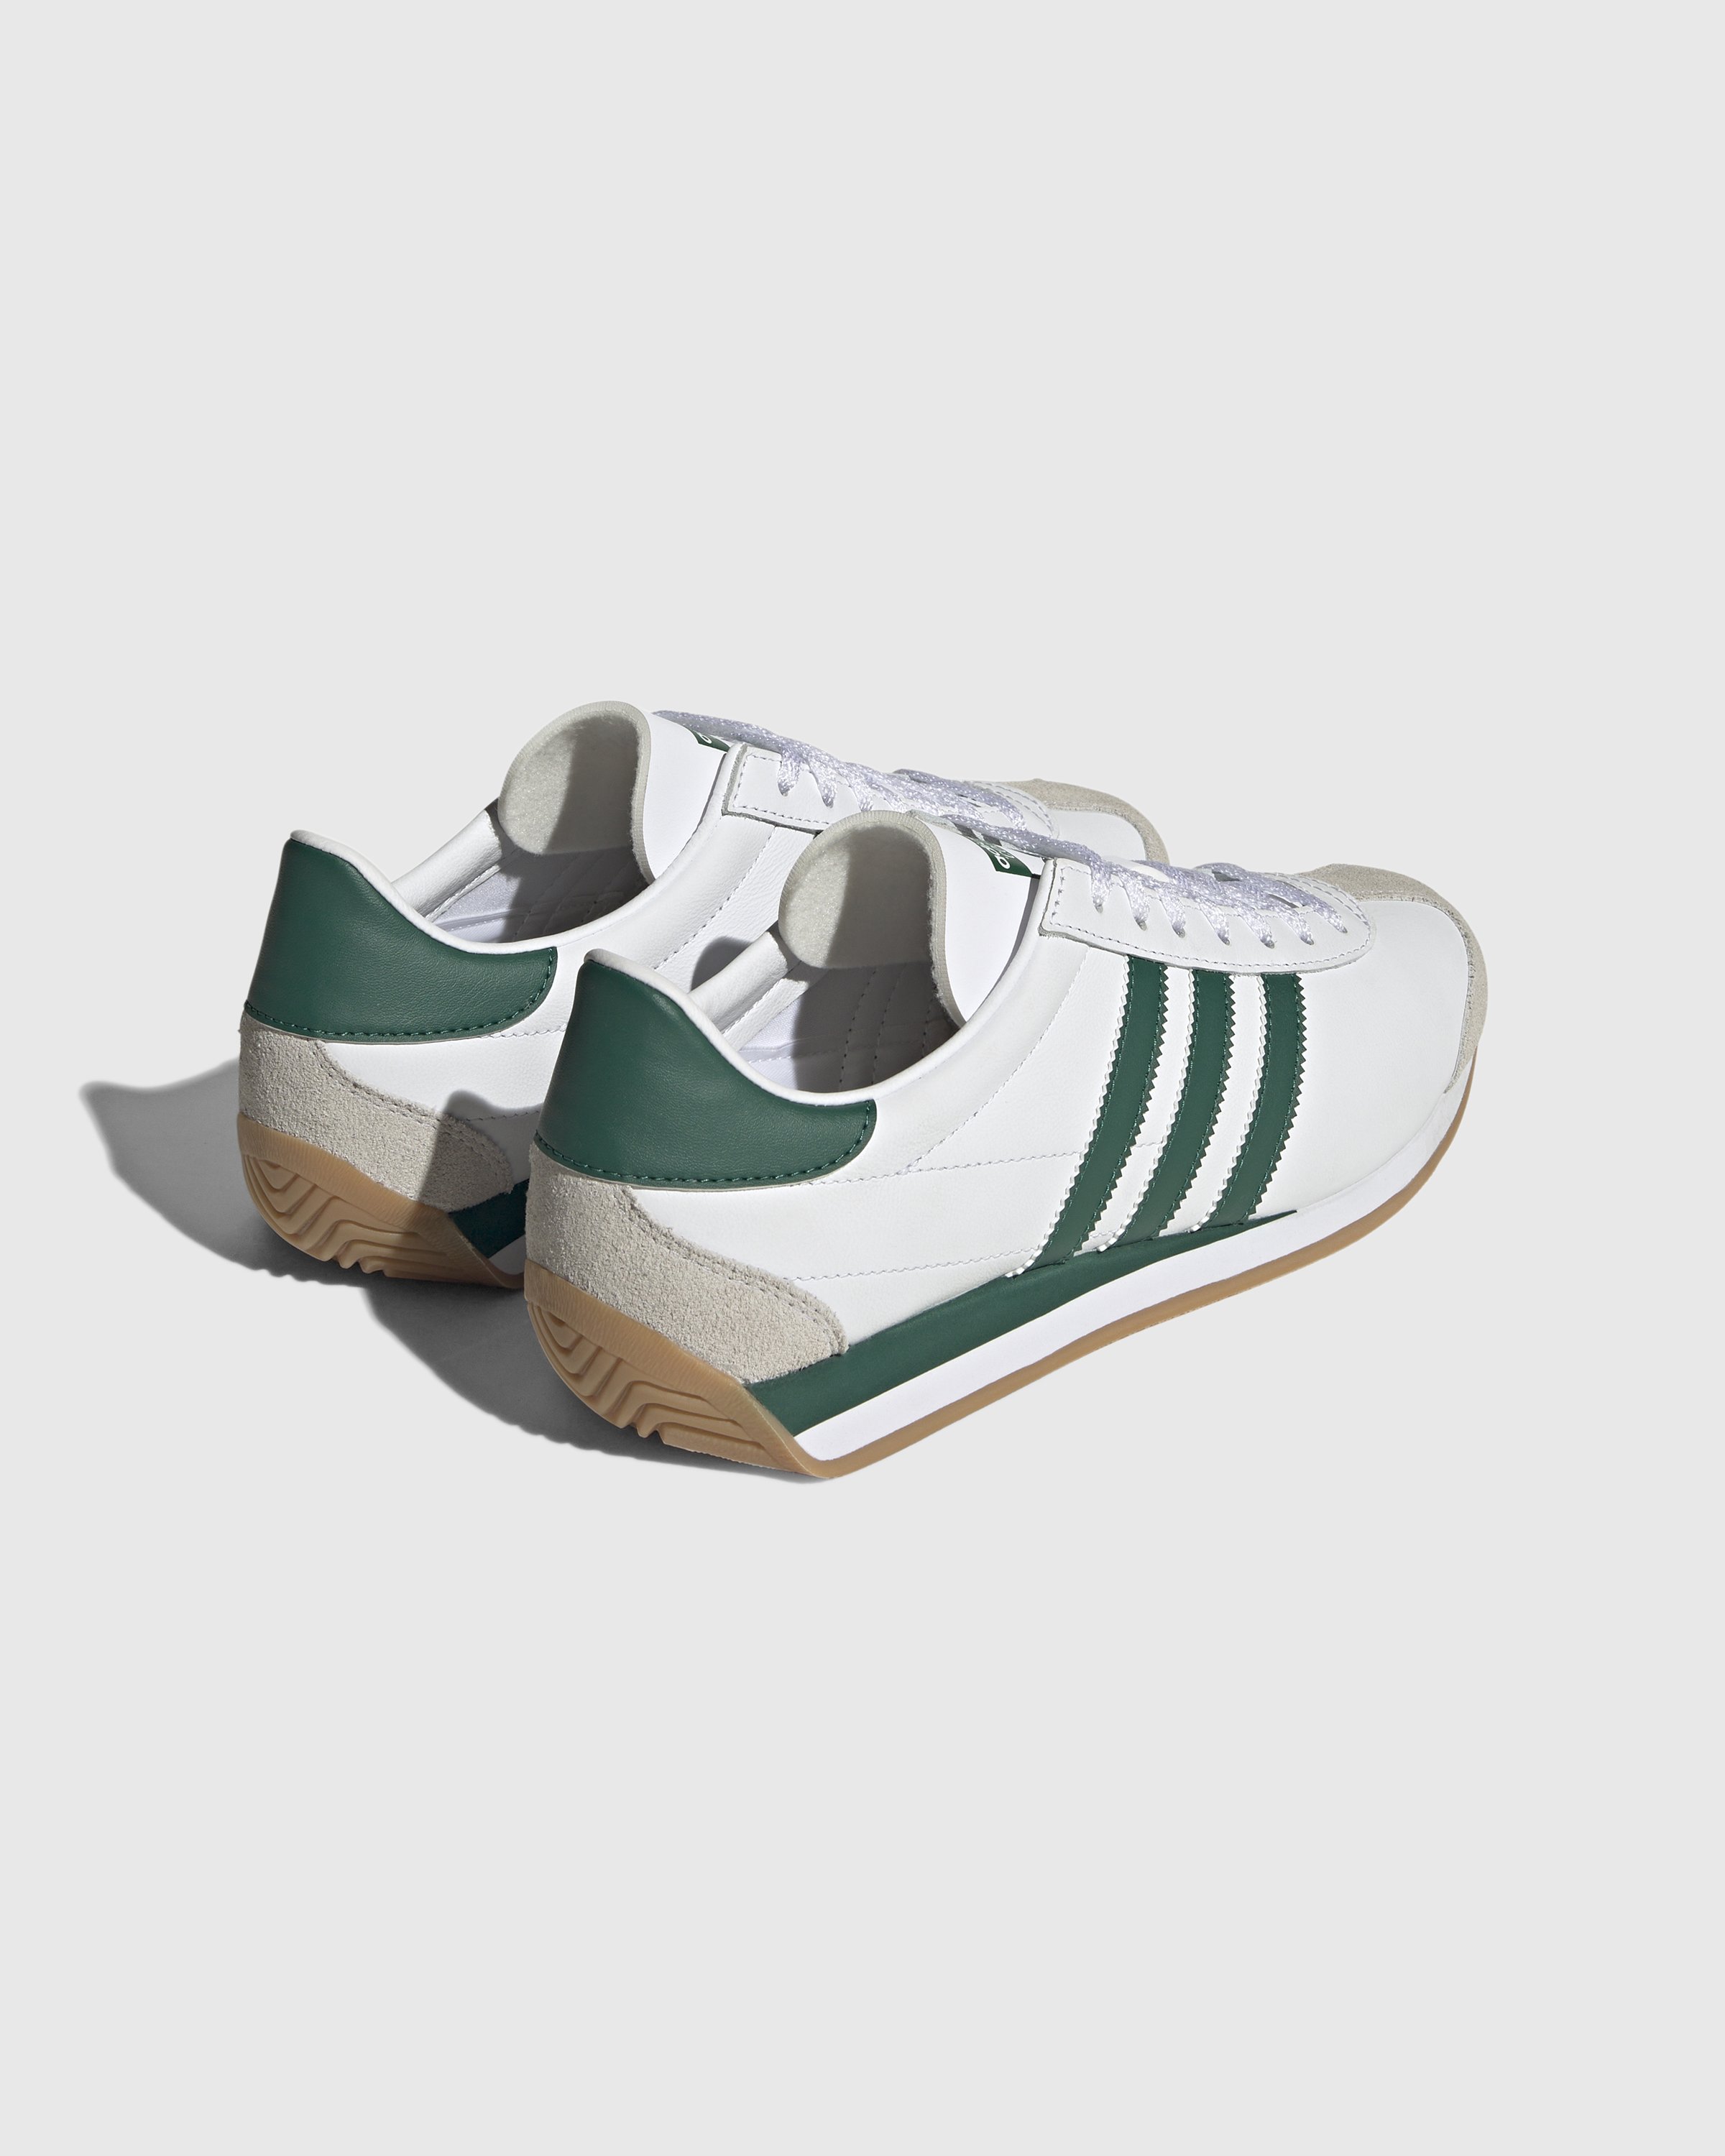 Adidas - Country OG Cloud White/Collegiate Green - Footwear - White - Image 4